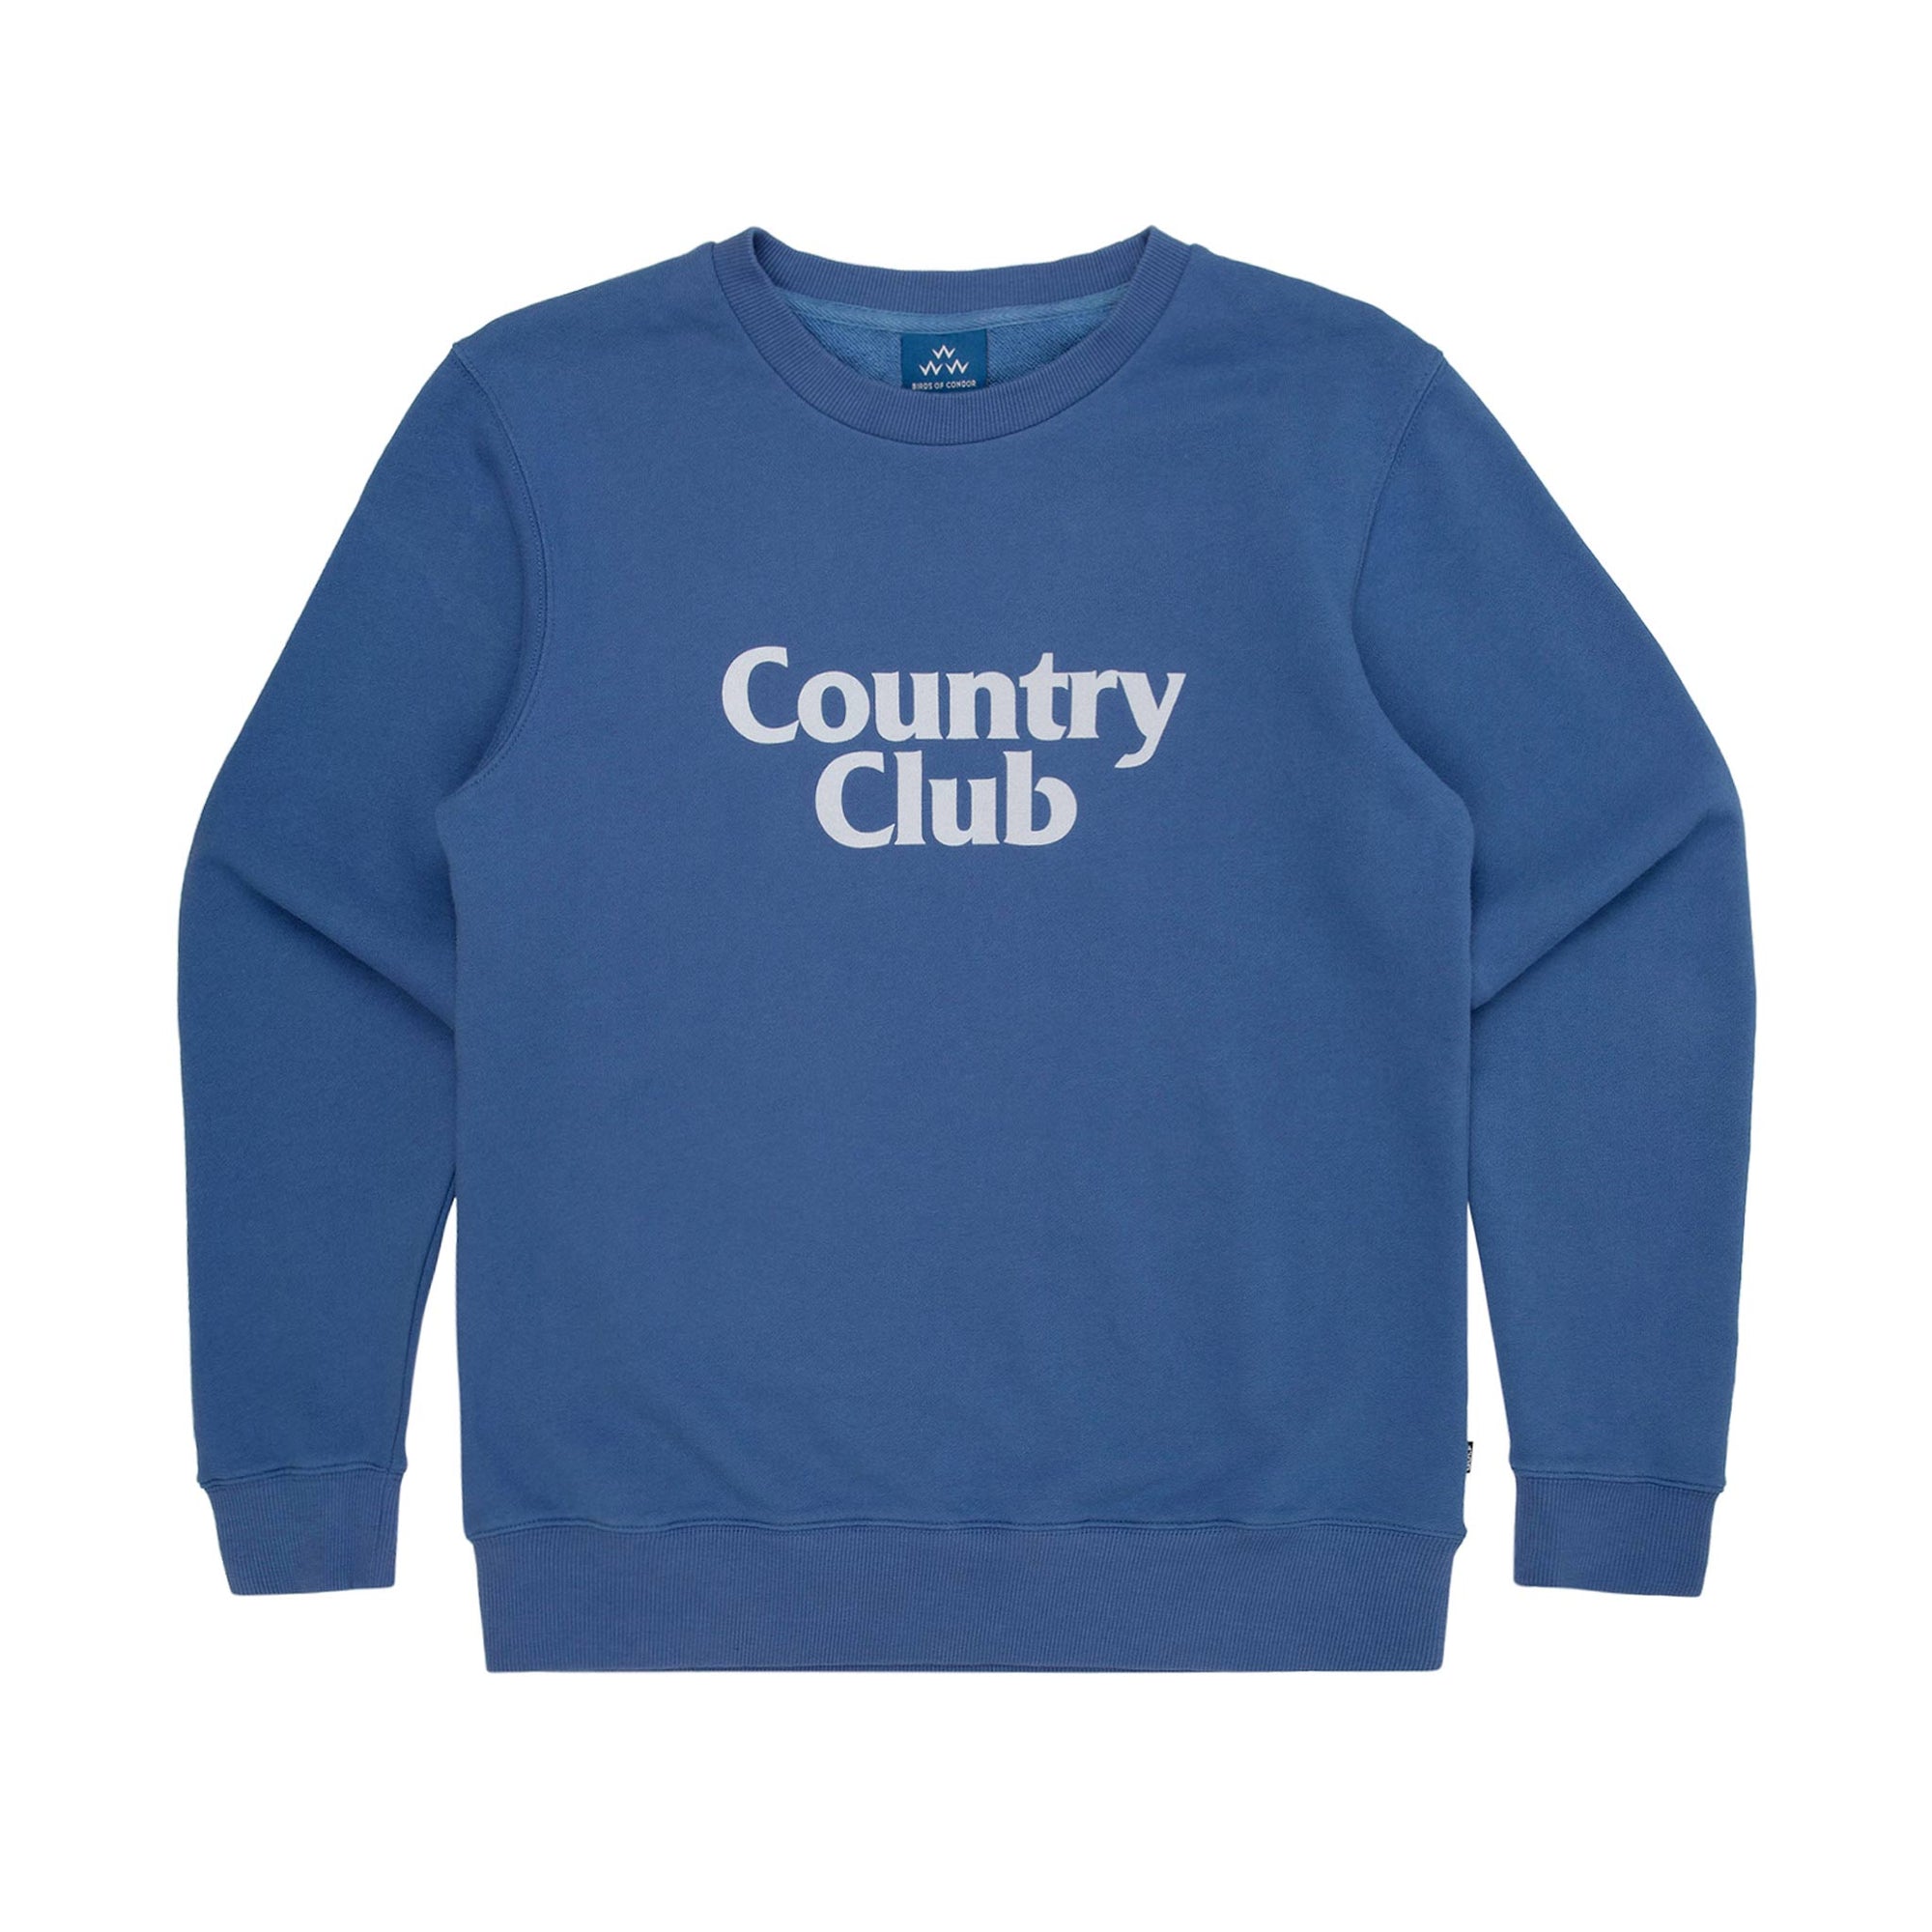 A vibrant blue crew neck with a classic white Country Club print, made from 100% Certified GOTS Organic French Terry Cotton for a premium hand feel and a regular fit. Ideal for your next rendezvous.